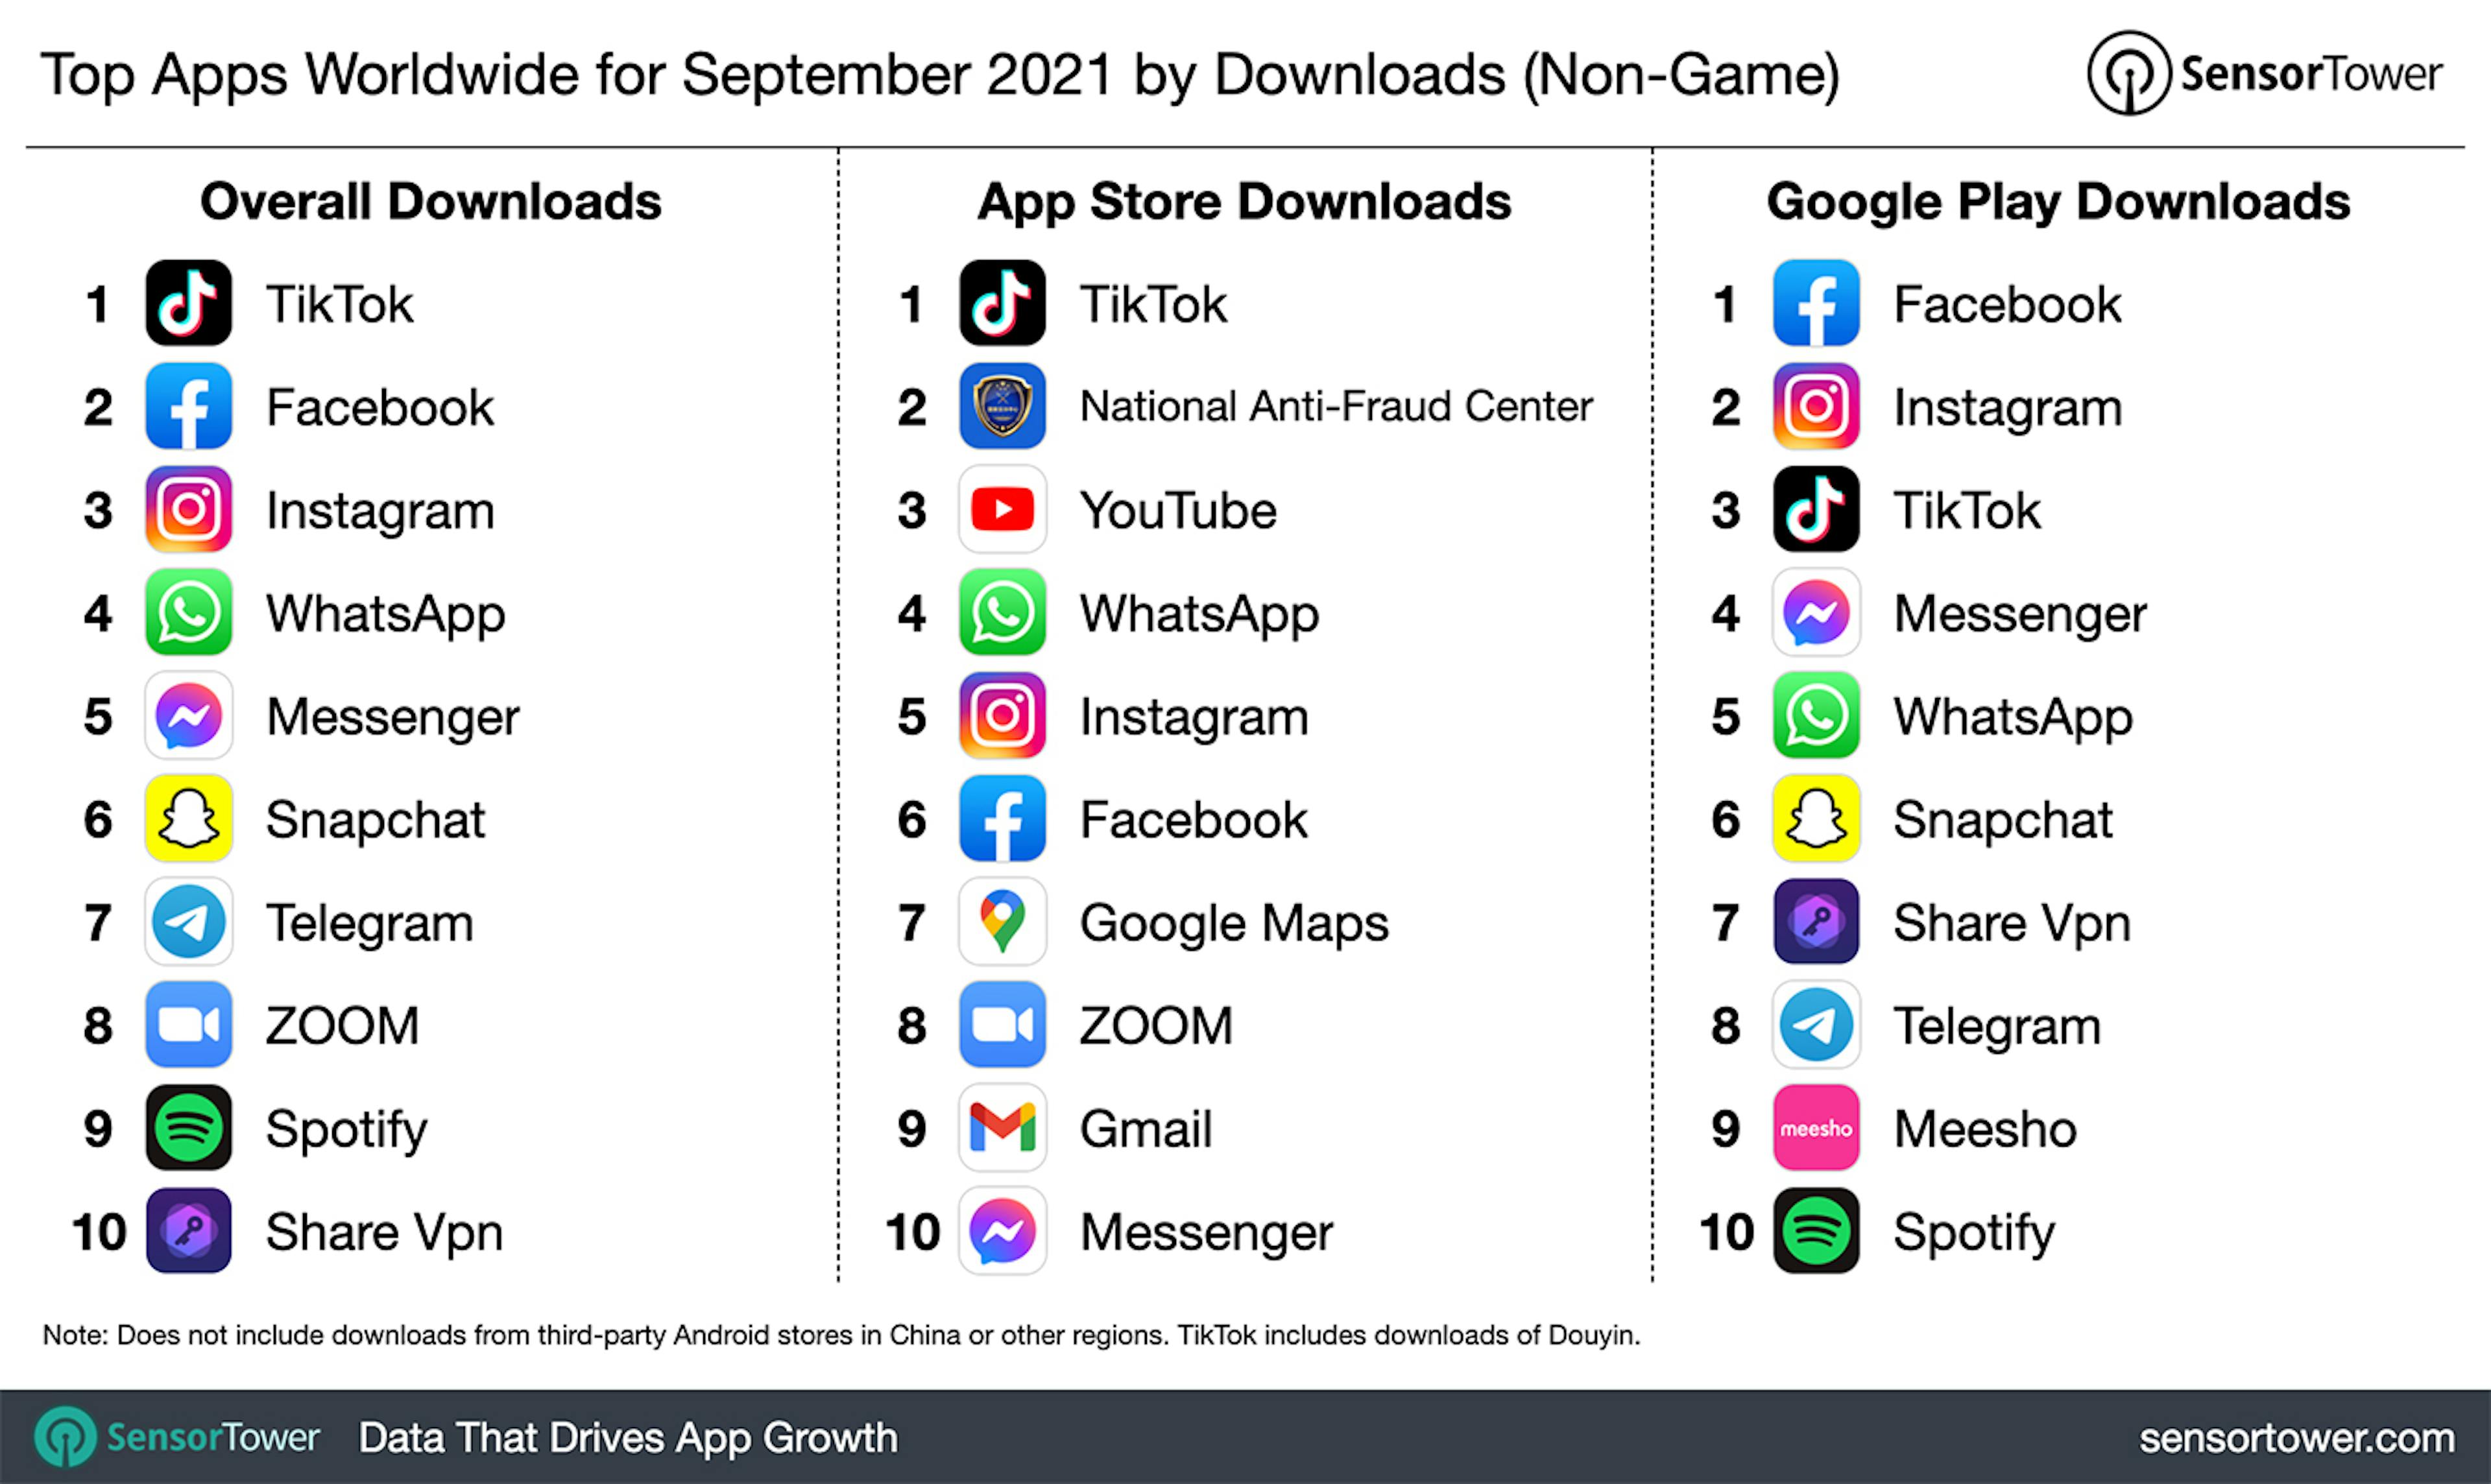 Top 10 most popular mobile apps almost all consist of various social networks and messengers